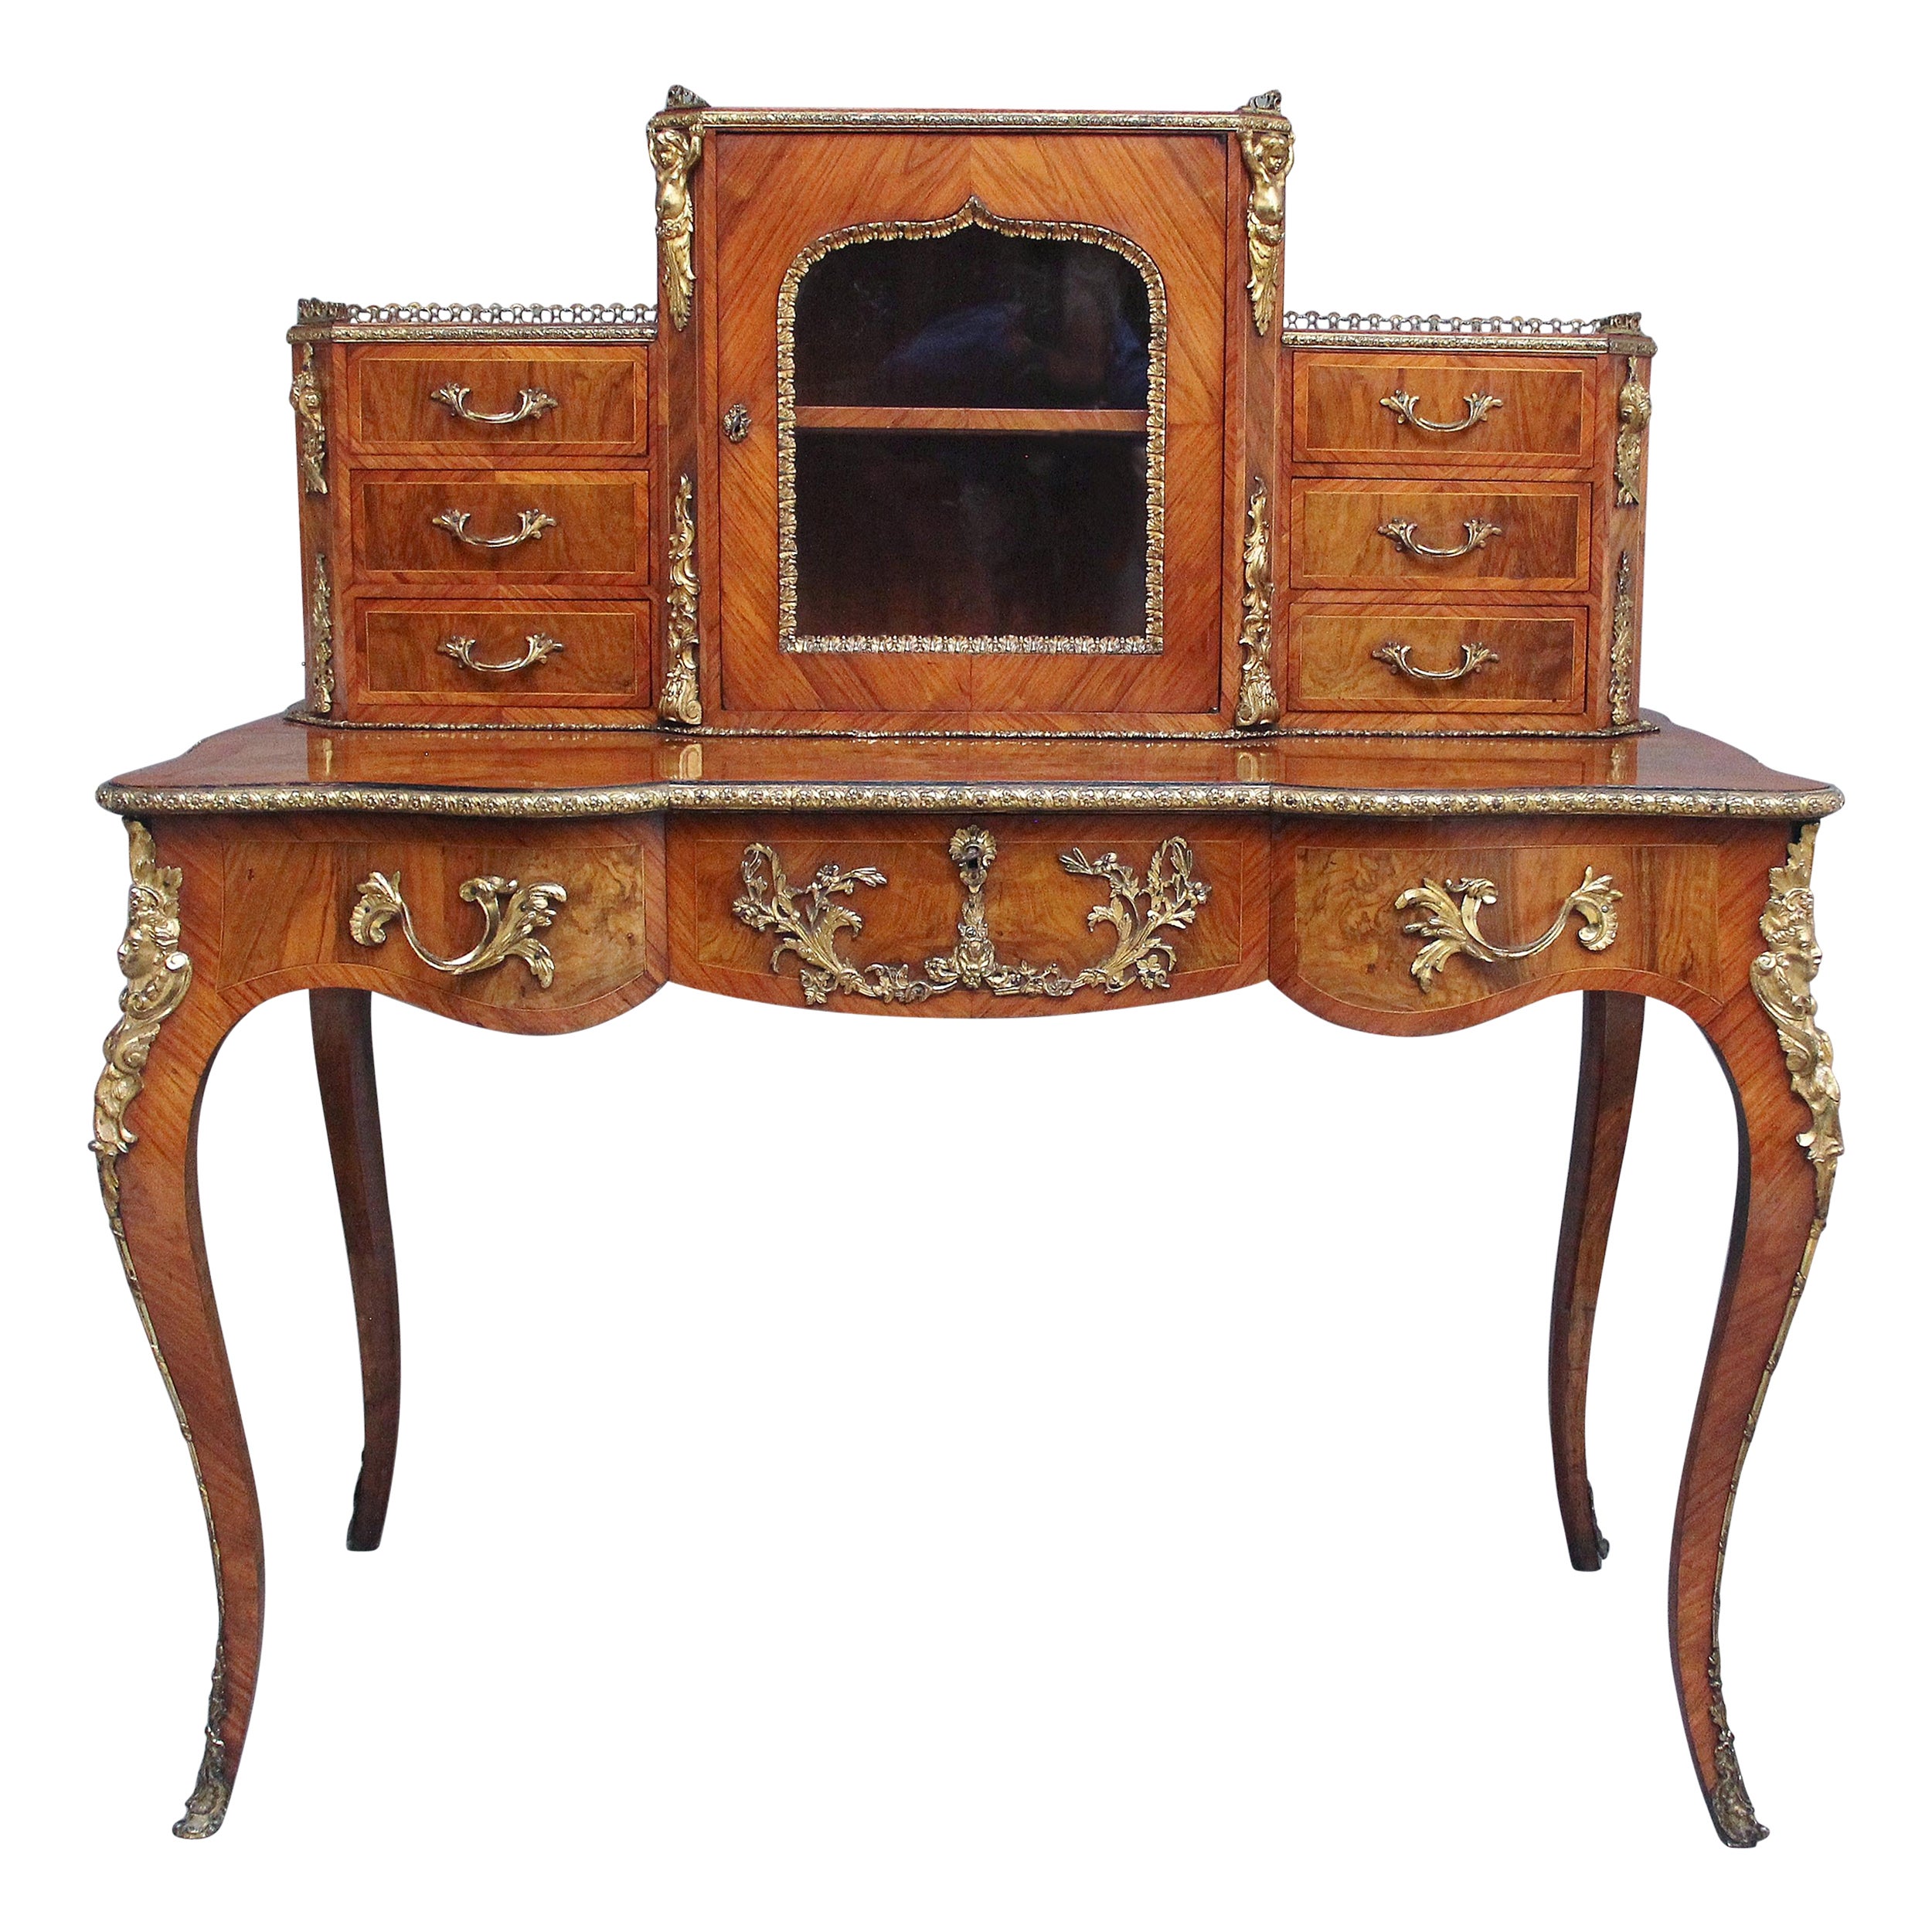 19th Century walnut desk by Gillows For Sale